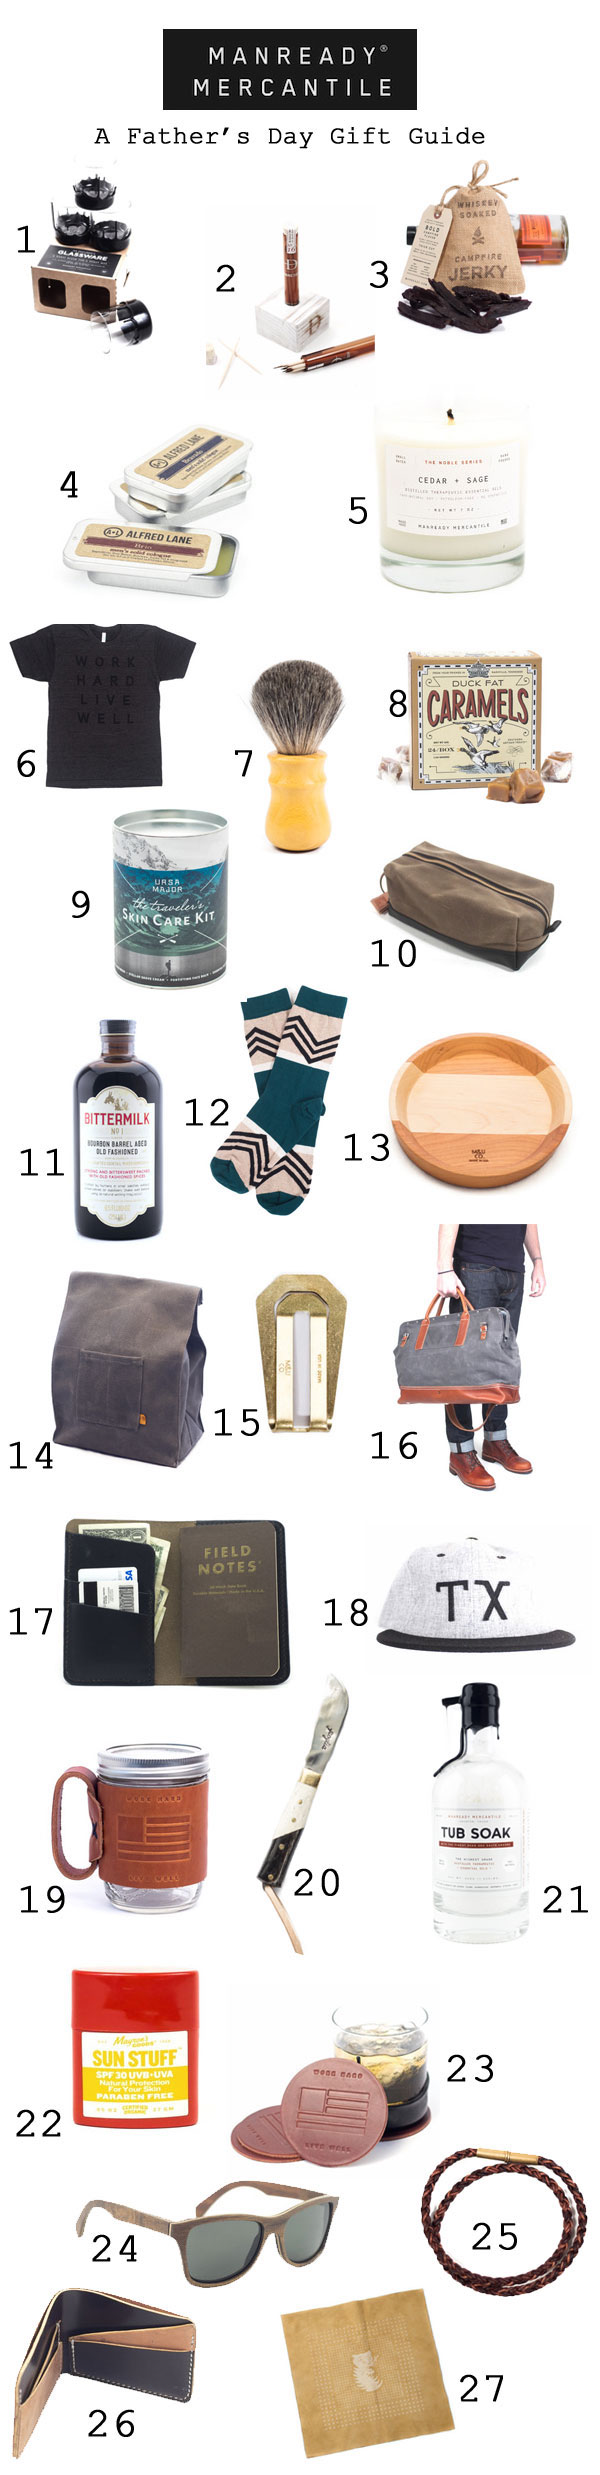 Manready-Mercantile-Father's-Day-Gift-Guide